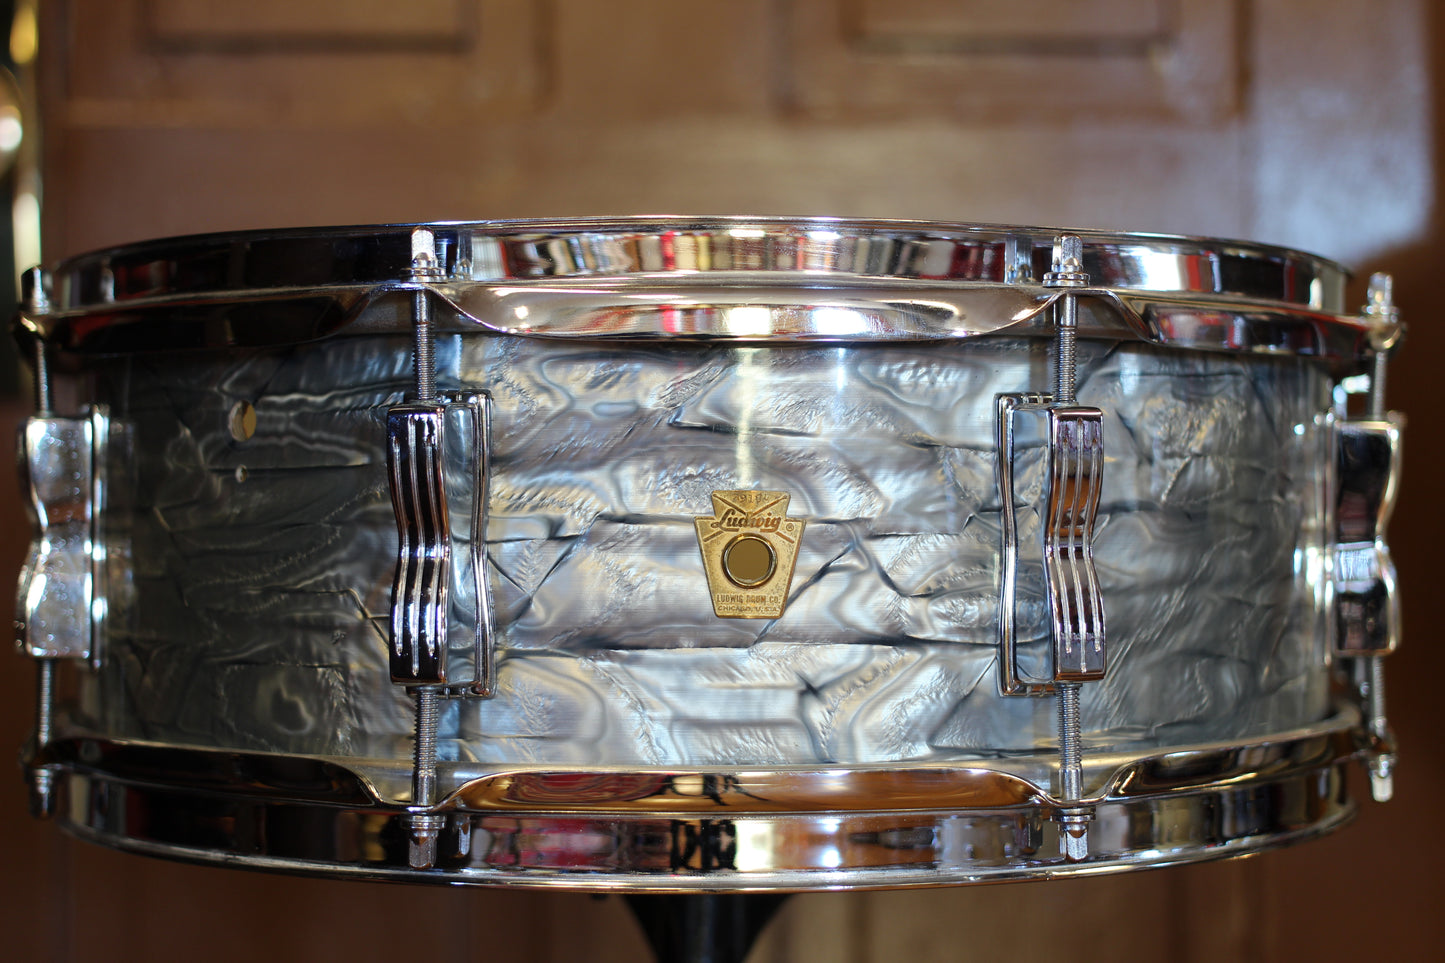 1964 Ludwig 5"x14" Jazz Festival Snare Drum in Sky Blue Pearl